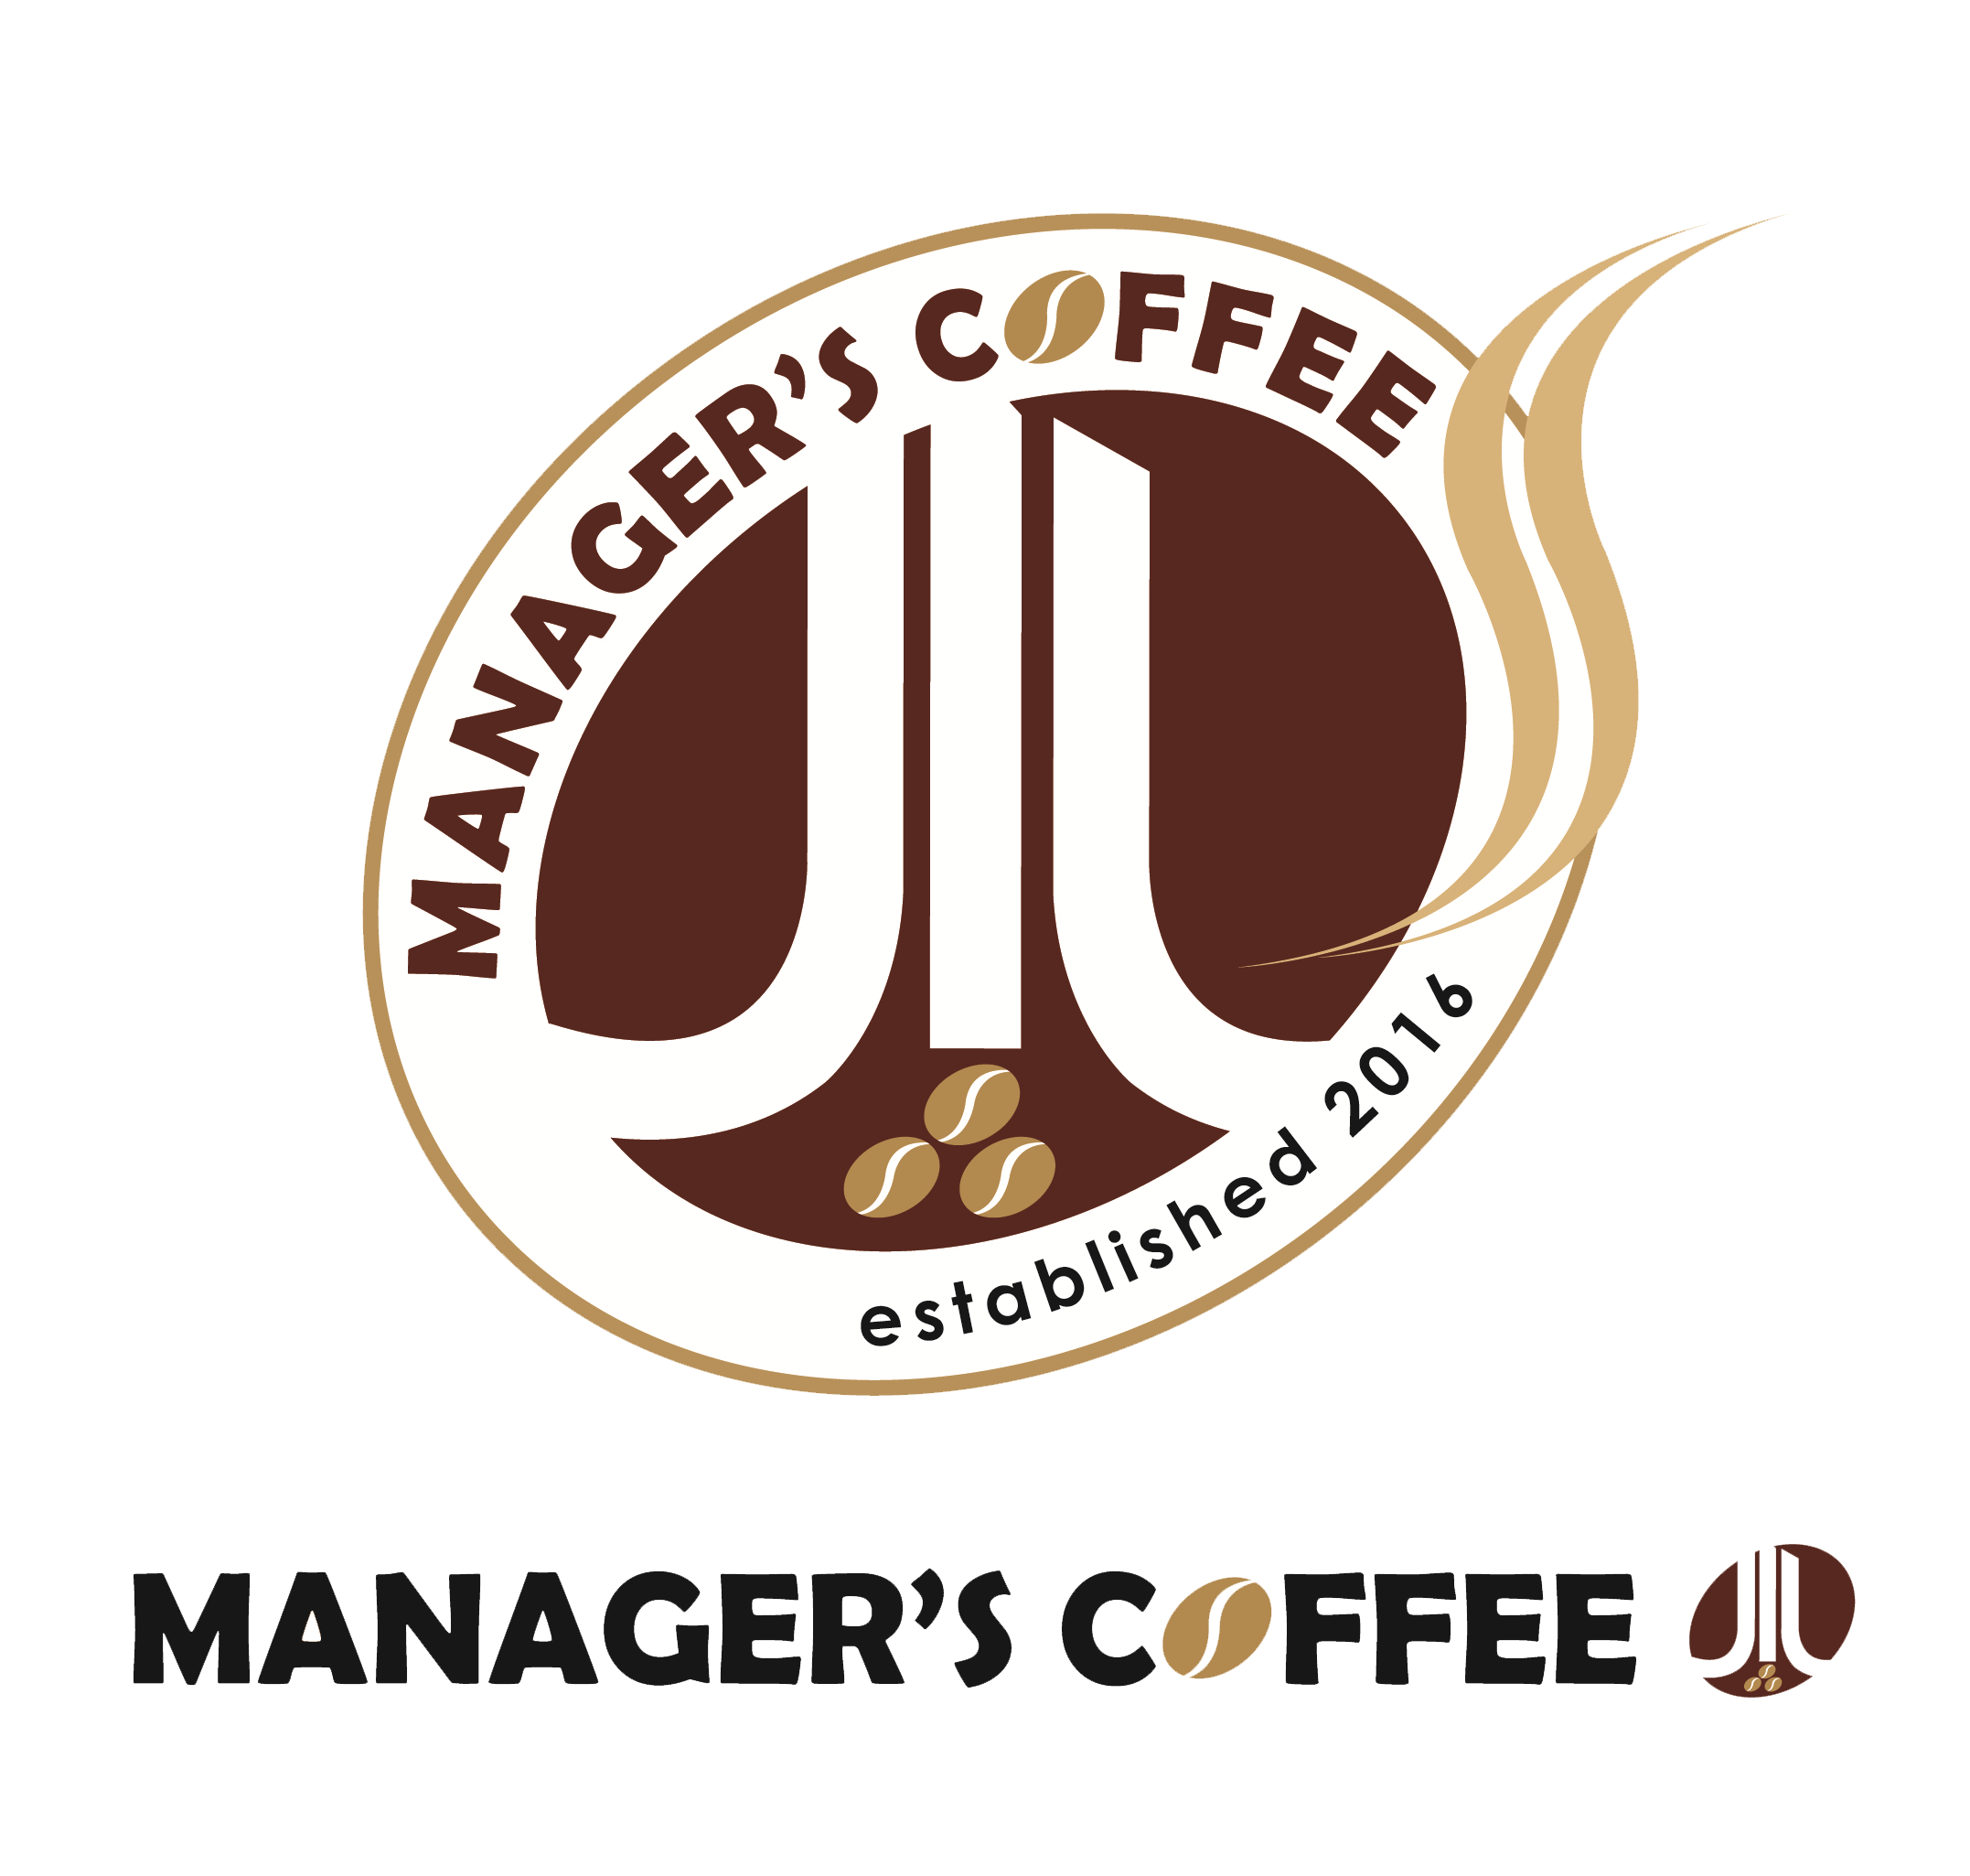 MANAGER’S COFFEE